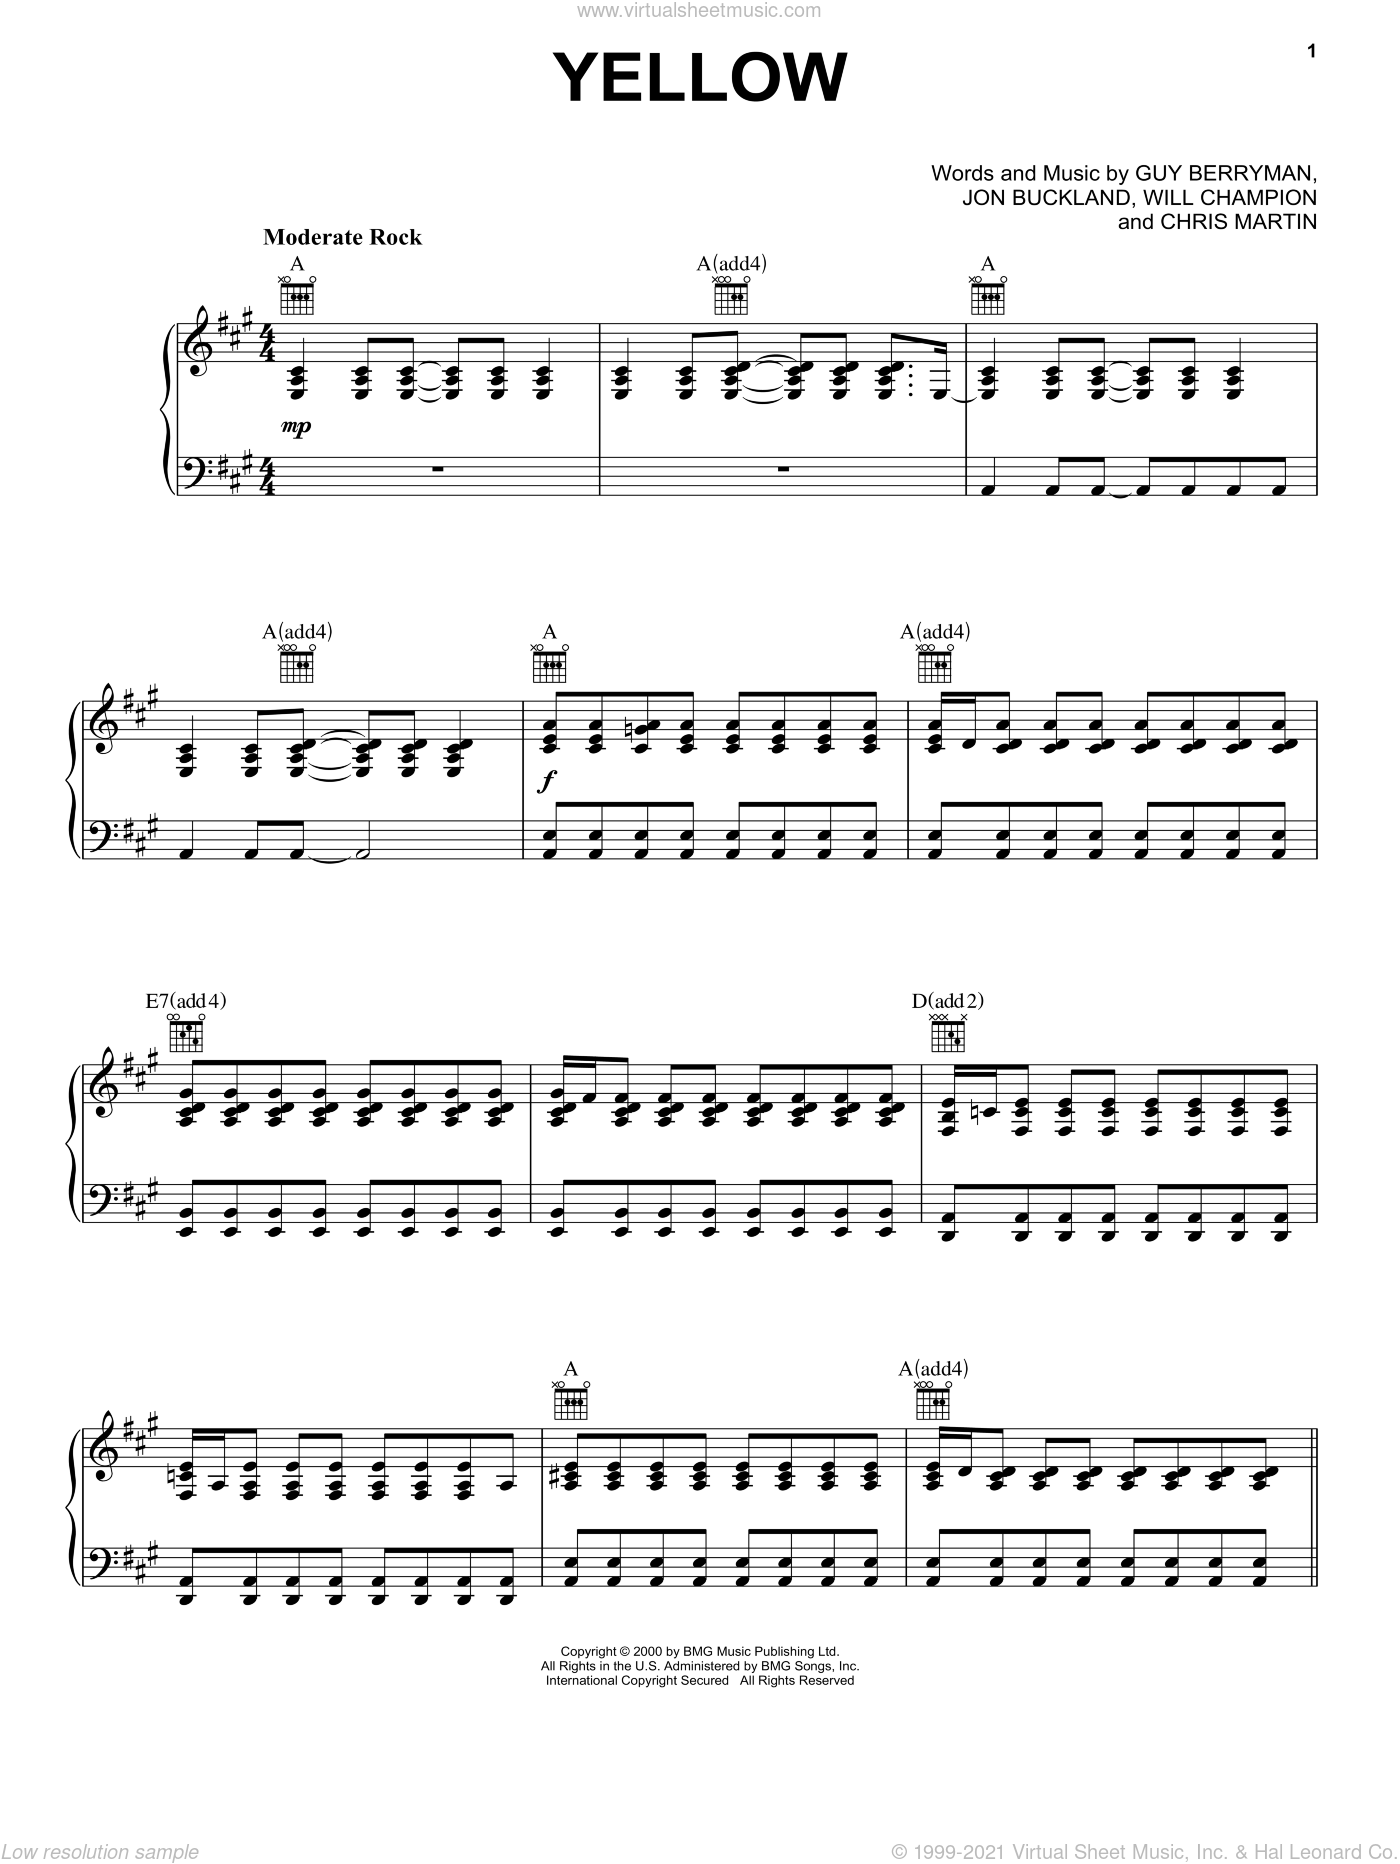 Coldplay - Yellow sheet music for voice, piano or guitar [PDF]